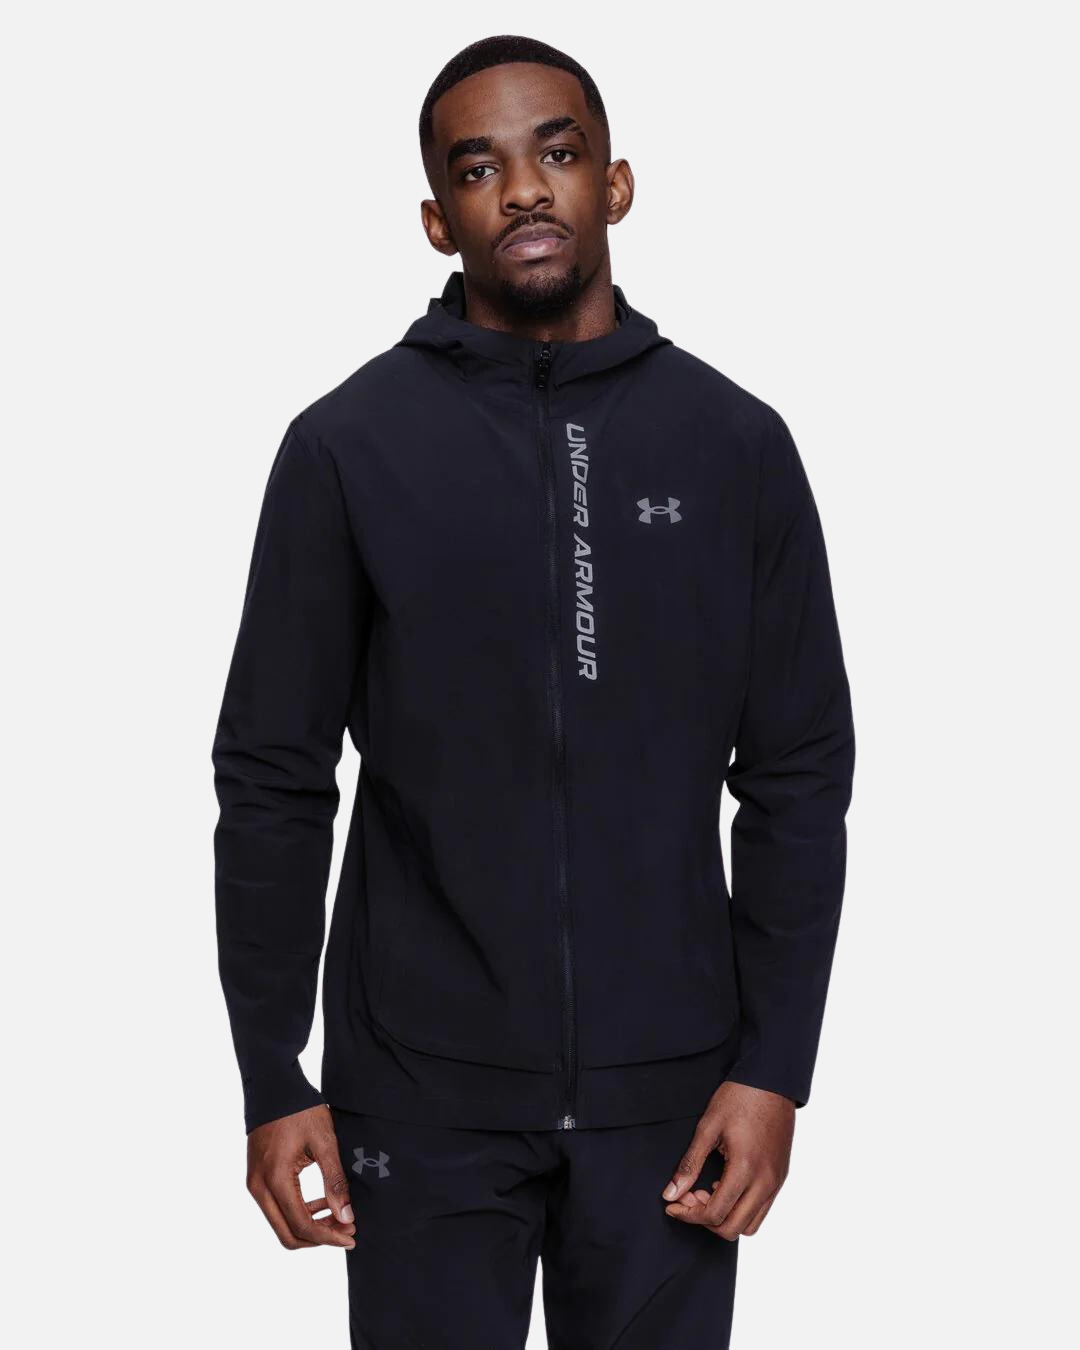 Under Armor Outrun The Storm Track Jacket - Black